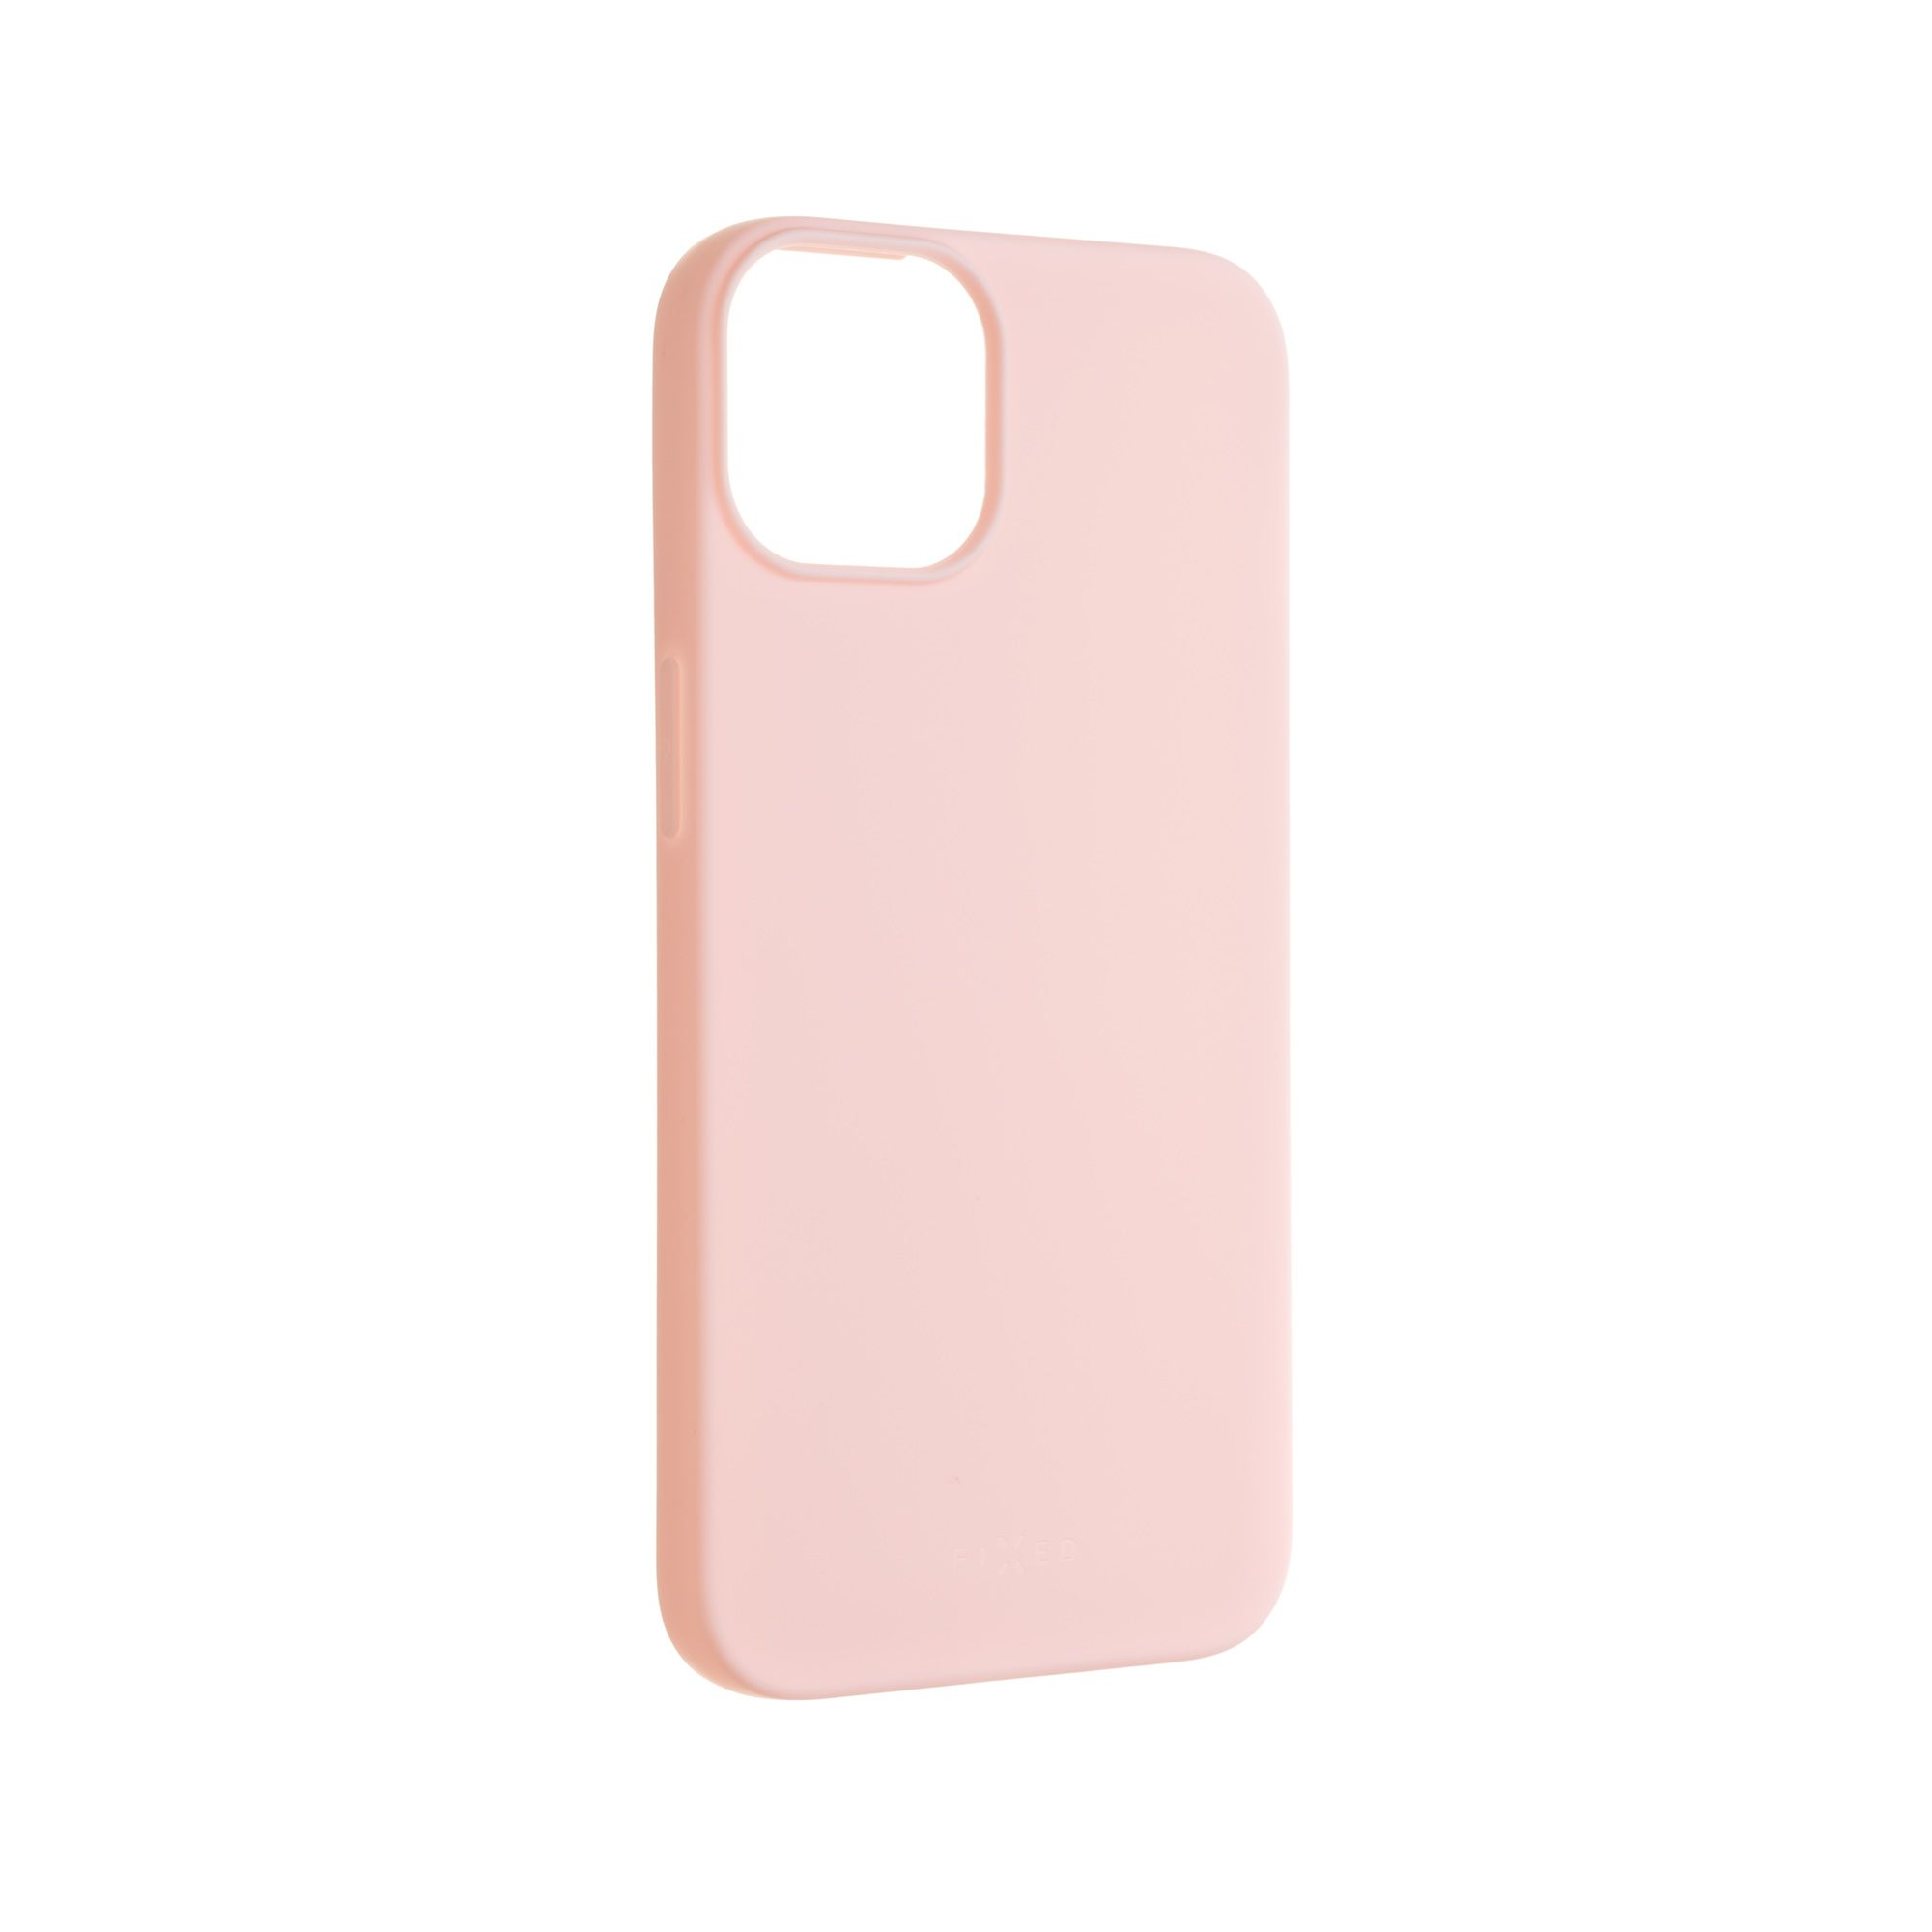 iPhone 13, Backcover, Rosa FIXED Apple, FIXST-723-PK,